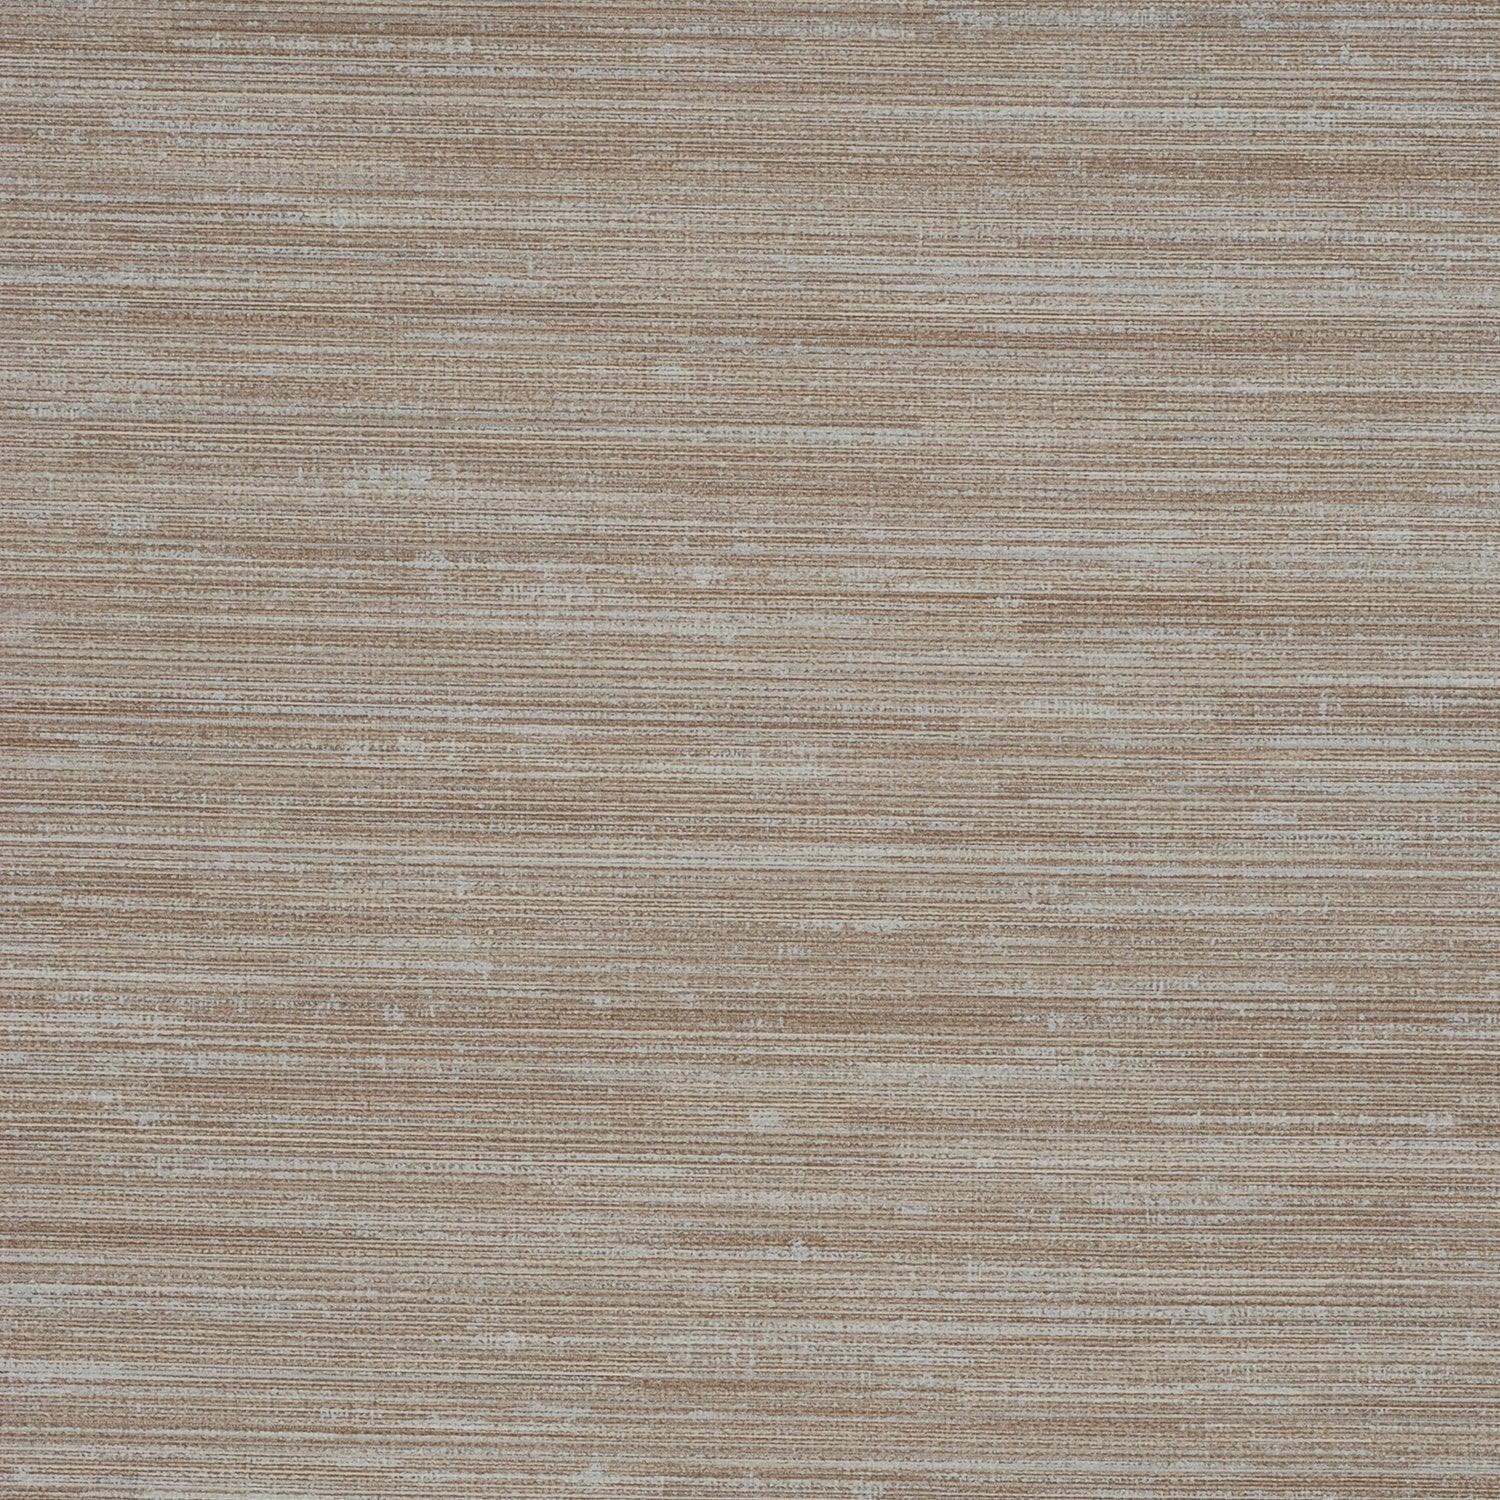 Casbah Silk - Y46481 - Wallcovering - Vycon - Kube Contract